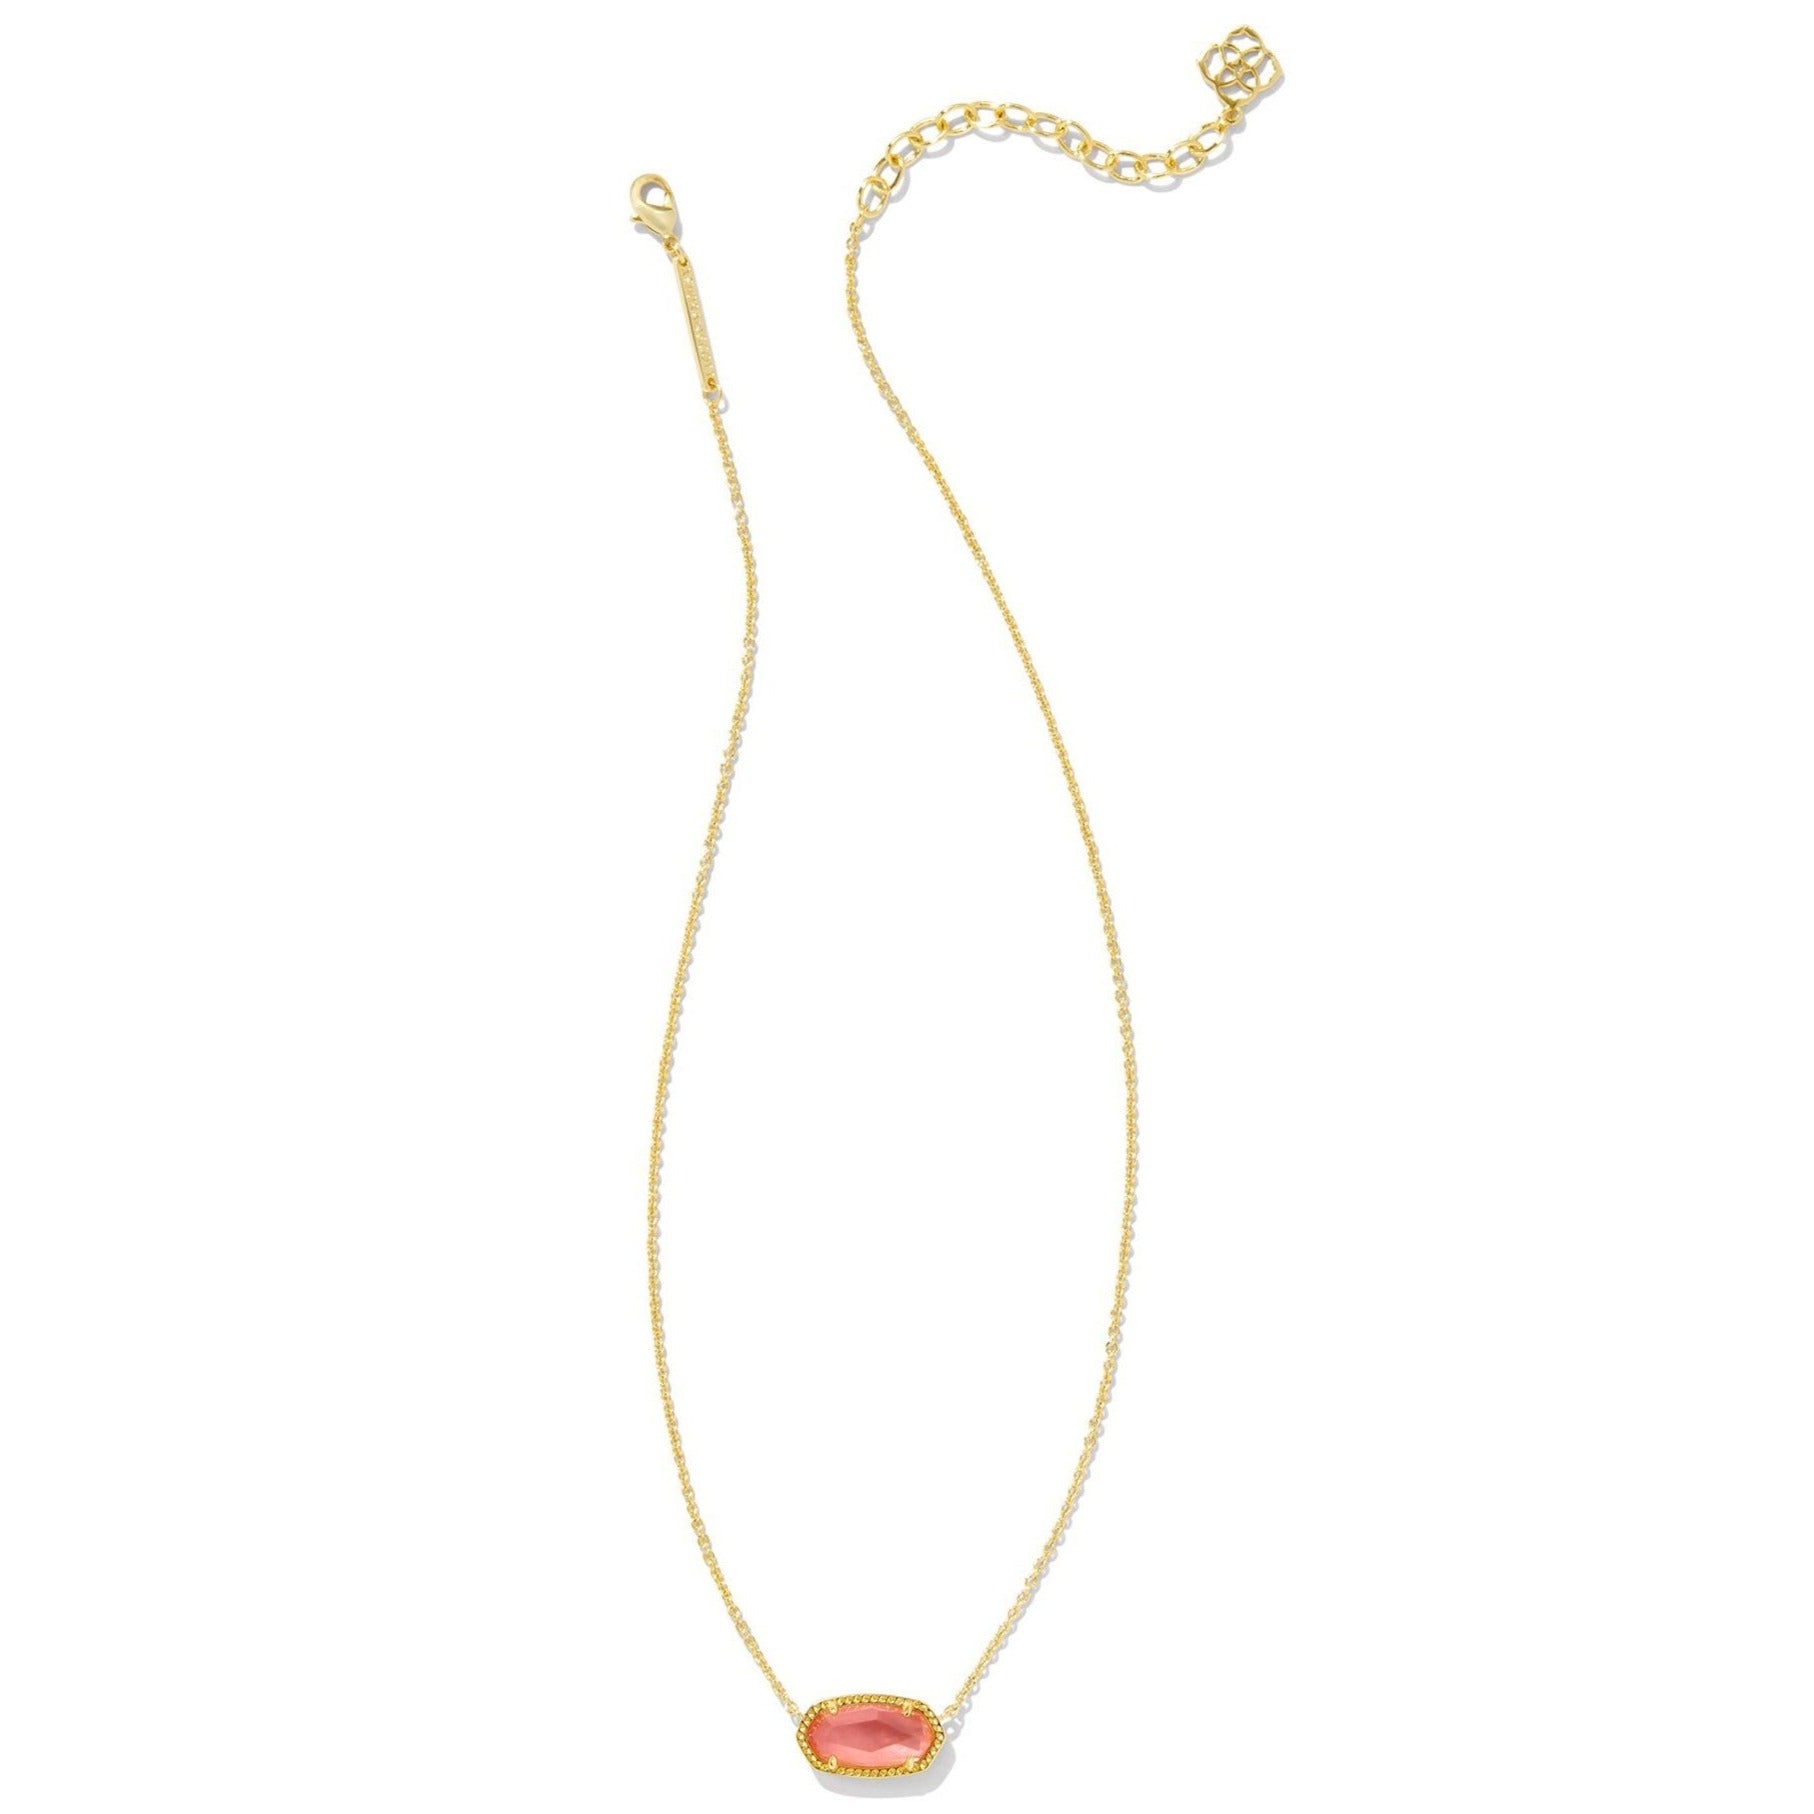 Kendra Scott | Elisa Gold Pendant Necklace in Coral Pink Mother of Pearl - Giddy Up Glamour Boutique